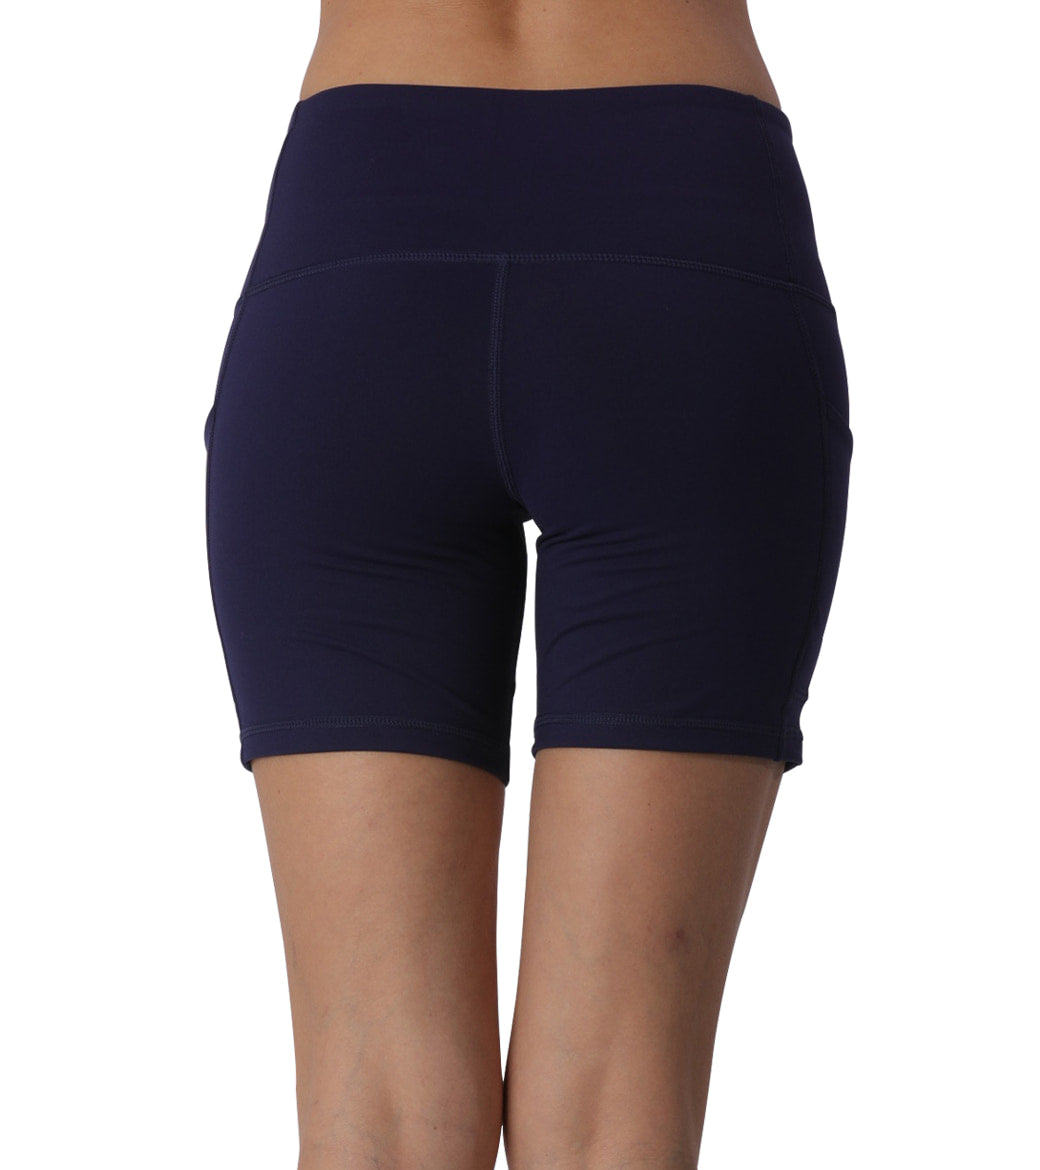 LOVESOFT Women's Workout Sports Yoga Shorts with Side Pocketed